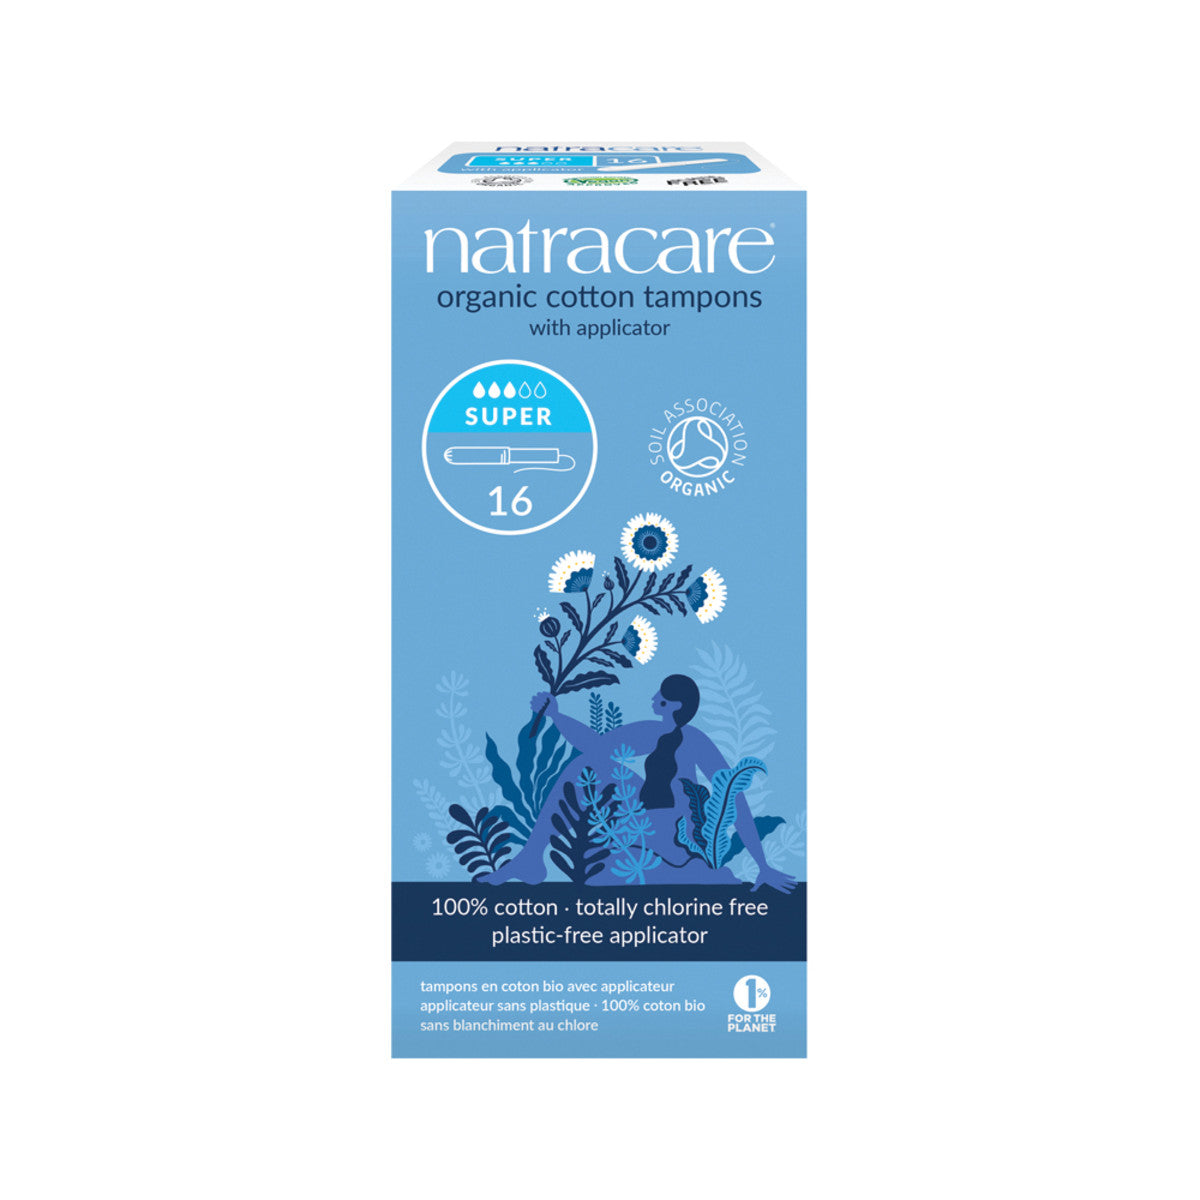 Natracare - Organic Cotton Tampons Super with Applicator